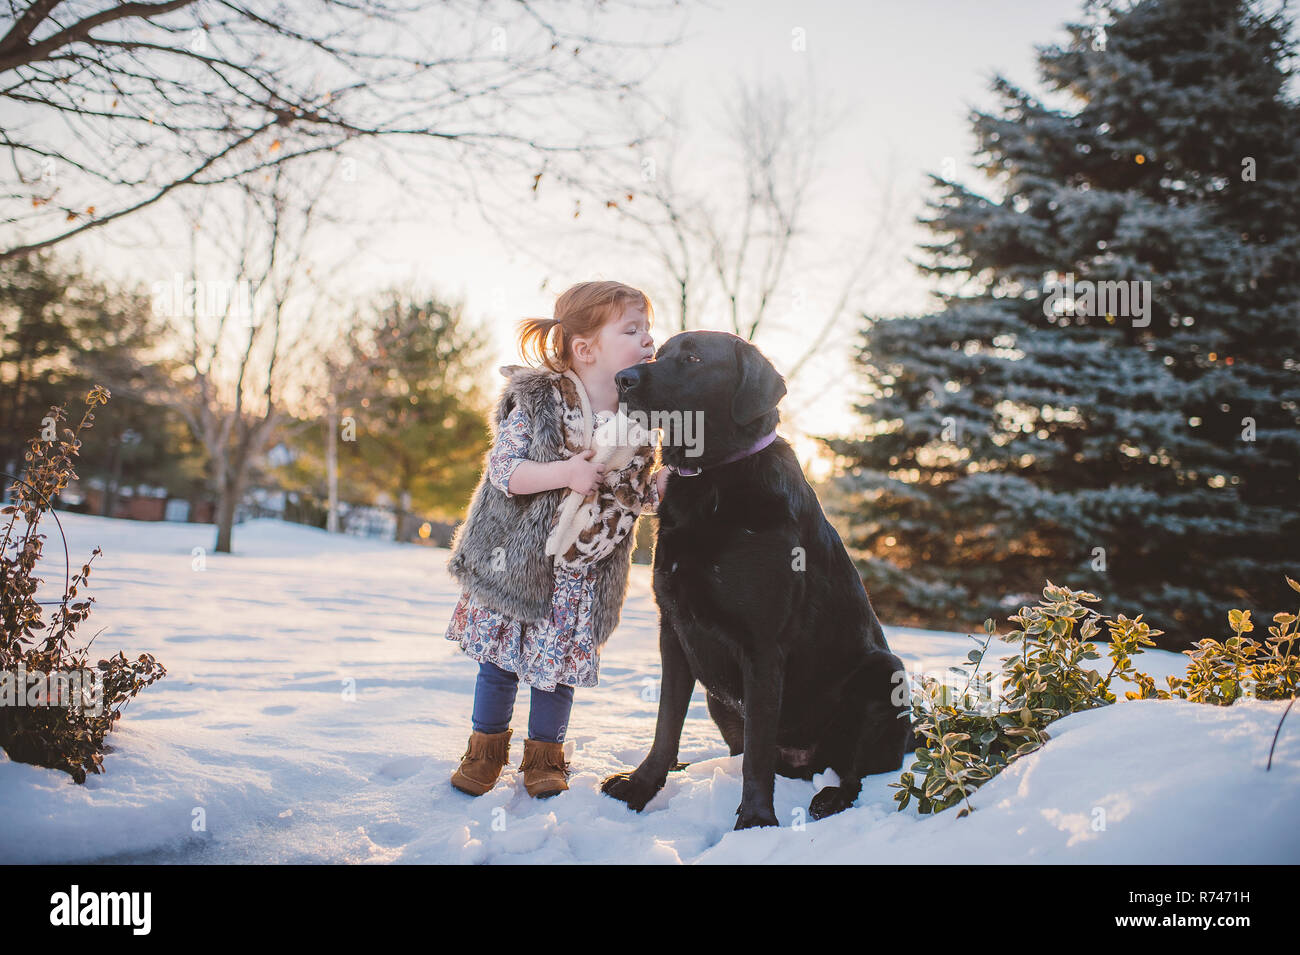 Female toddler with red hair playing in snow with dog, Keene, Ontario, Canada Stock Photo